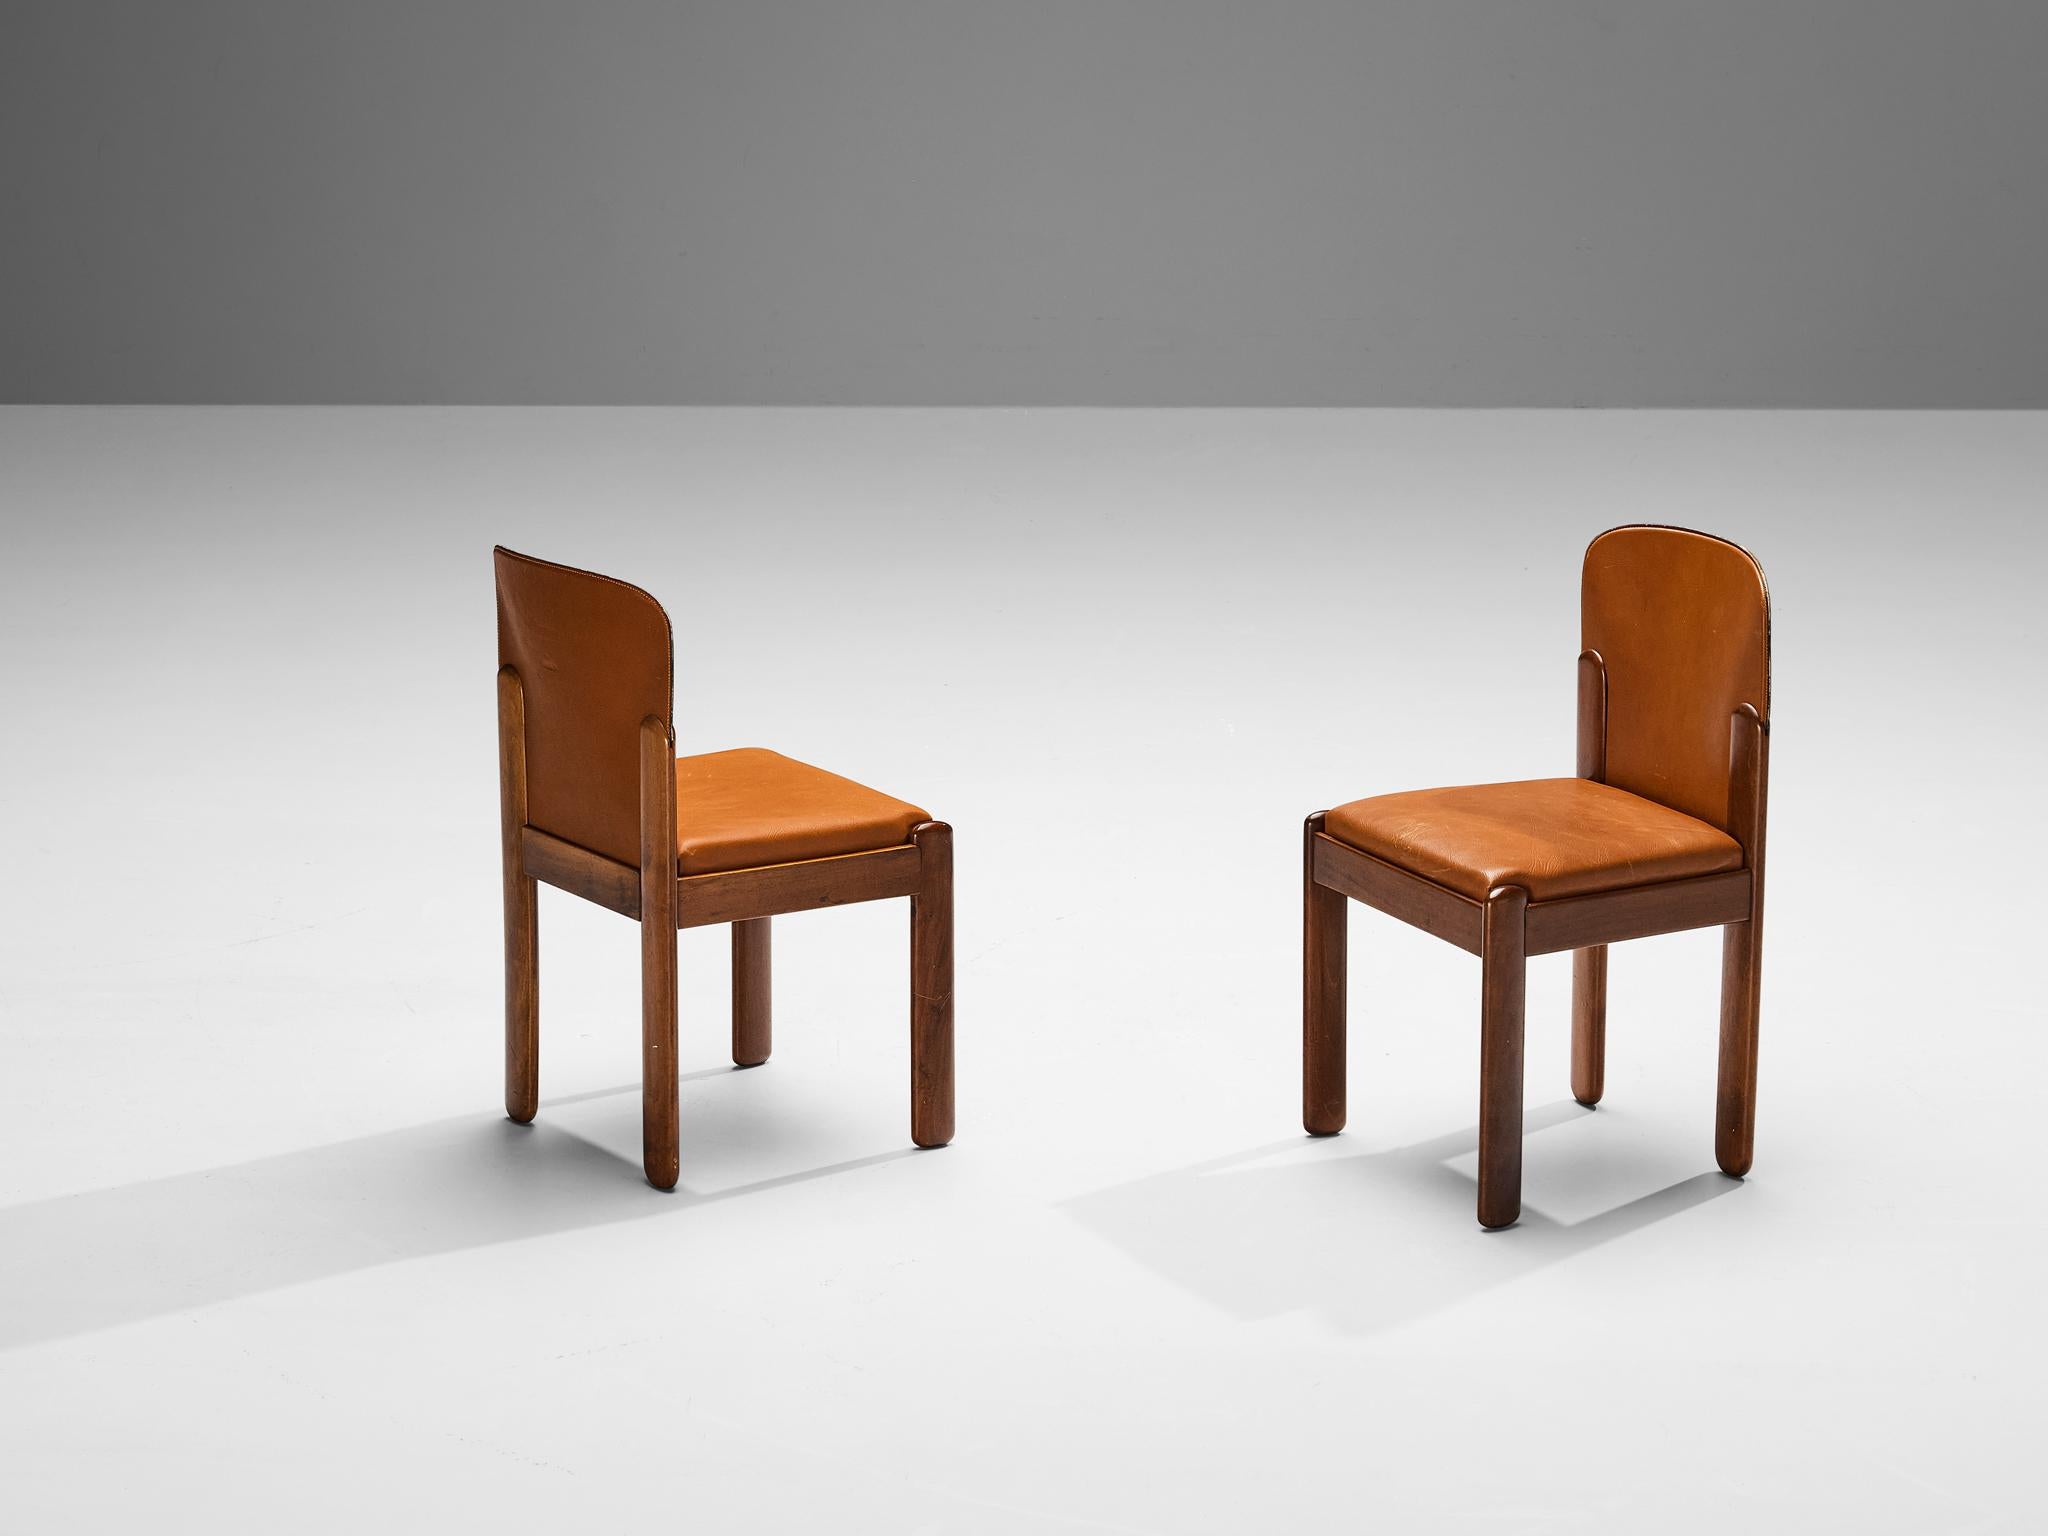 Silvio Coppola for Bernini, pair of dining chairs, model '330', cognac leather, walnut, Italy, 1960s

Wonderfully set of dining chairs in cognac leather and walnut wood by Italian designer Silvio Coppola. These aesthetically well balanced chairs